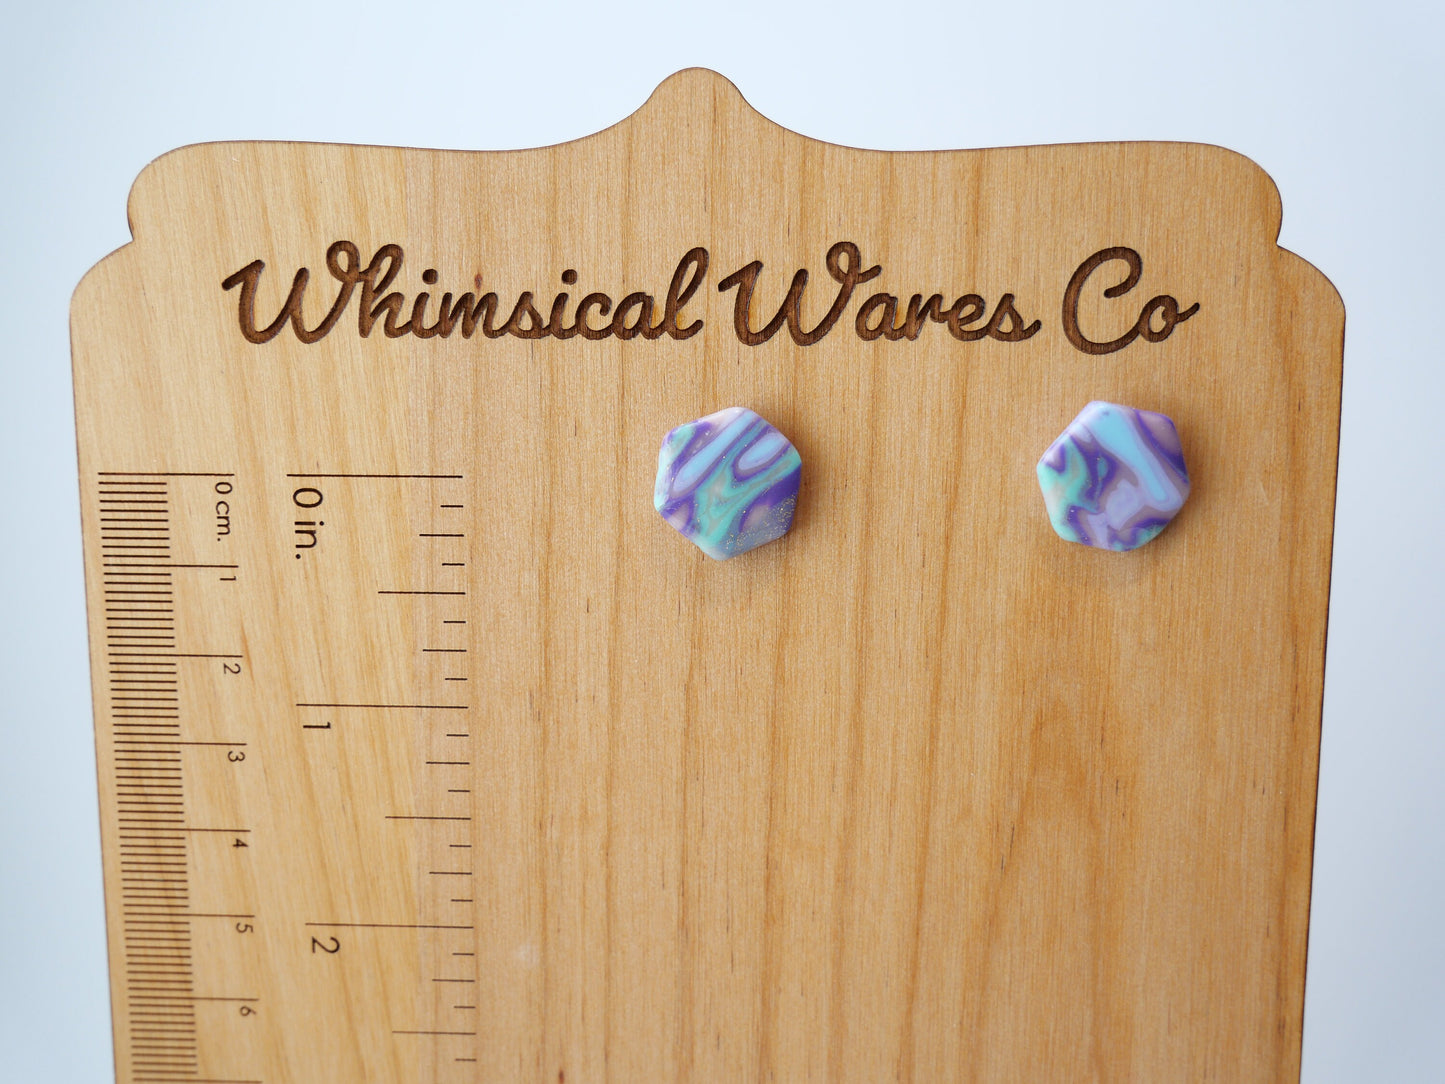 Maine-Inspired Geometric Poly Clay Earrings – Handcrafted Jewelry - Maine Made